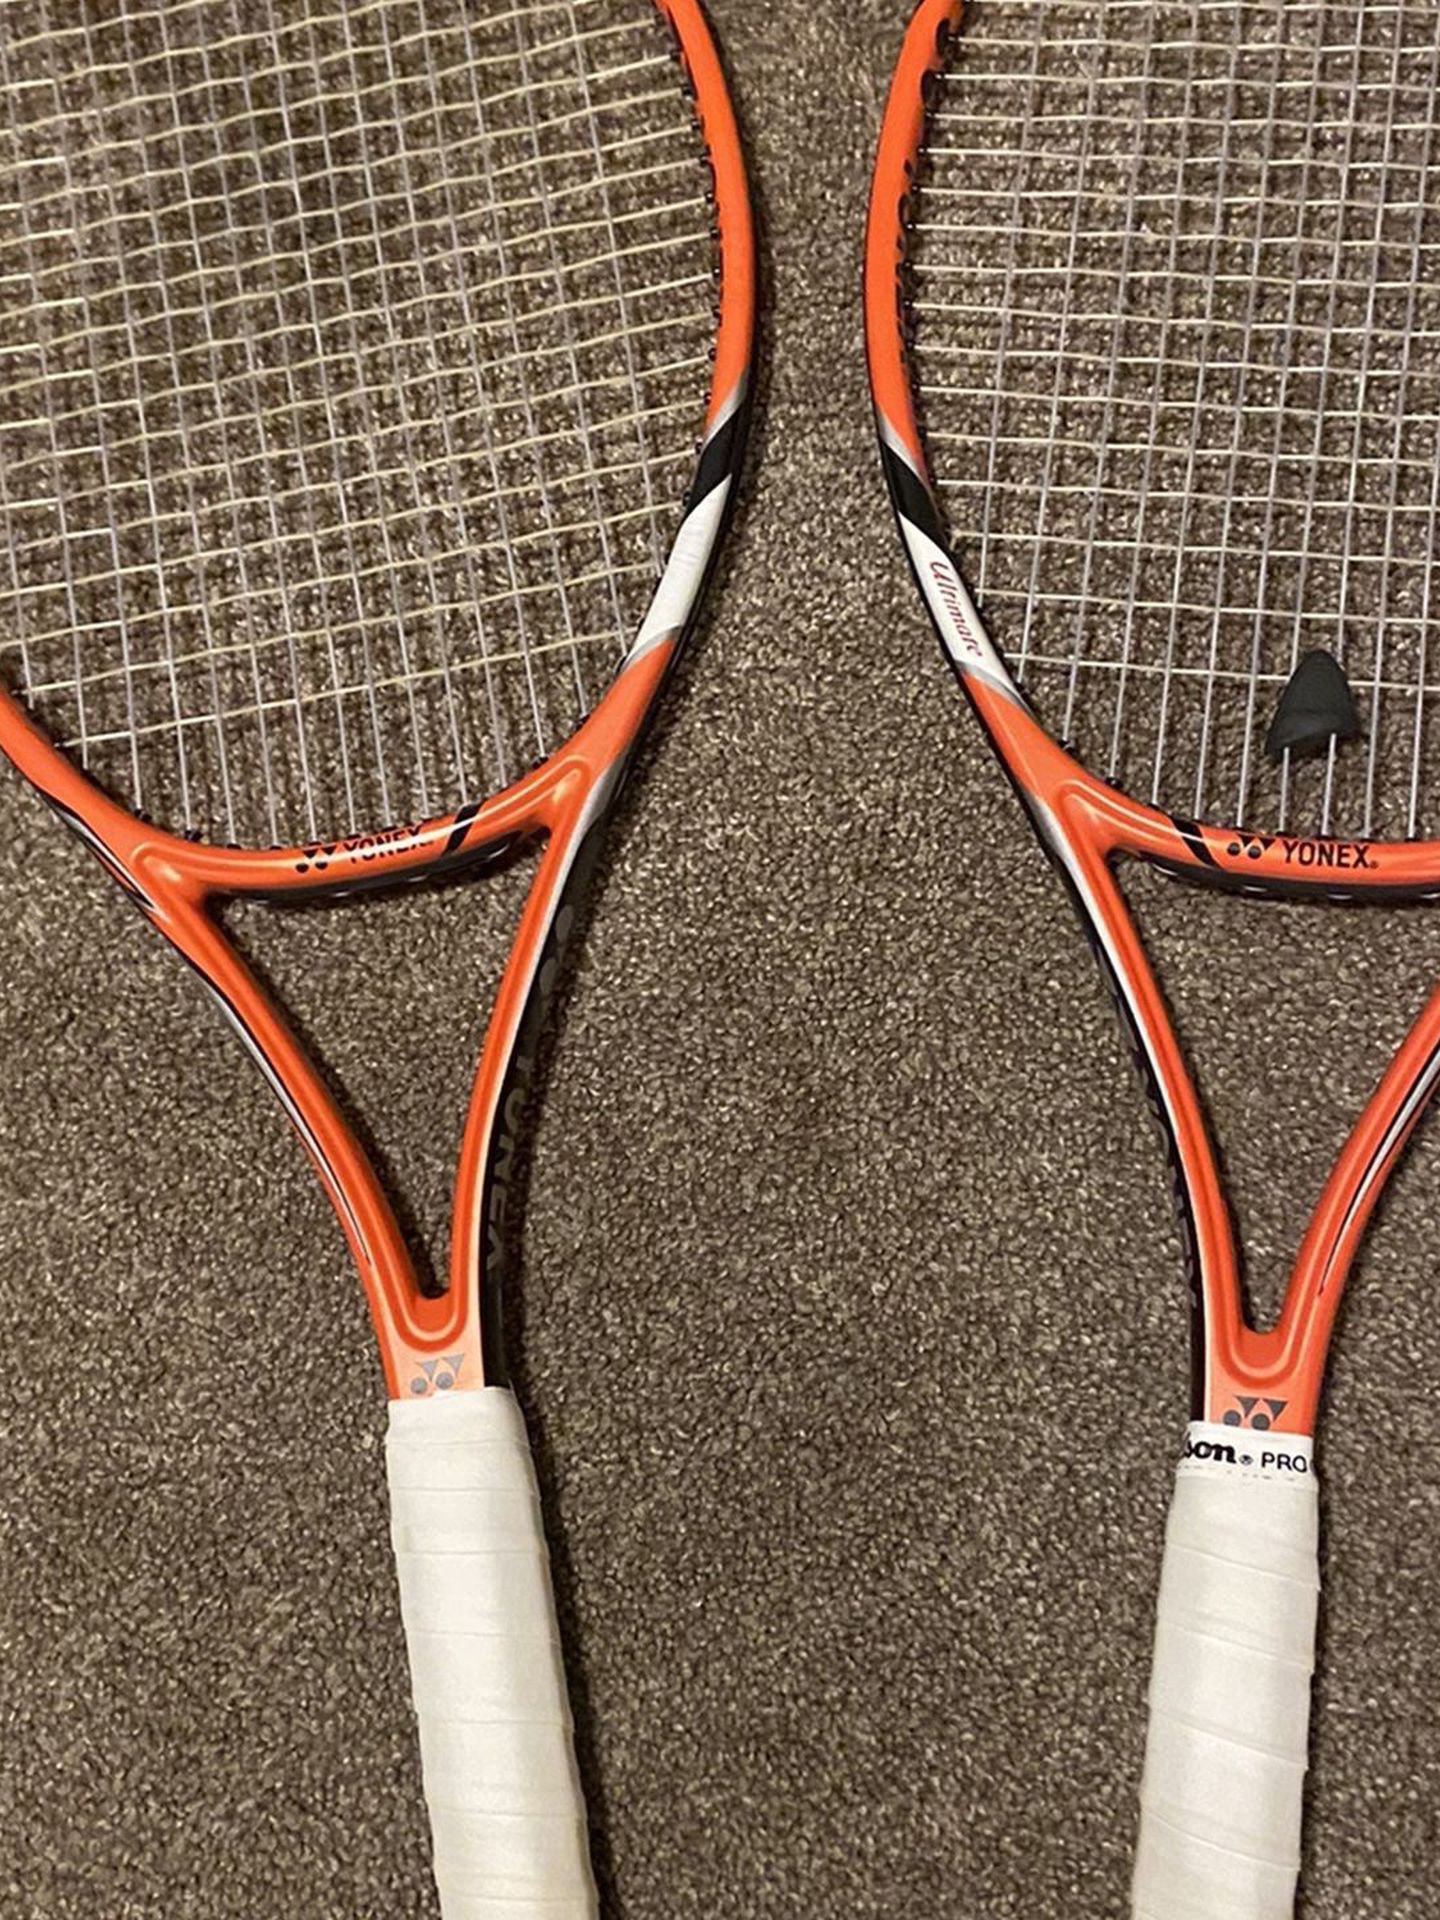 Yonex Vcore 330 Tour. $140 Per Racquet Or 240 For Both. Racquets are In Good Condition. New String Job.